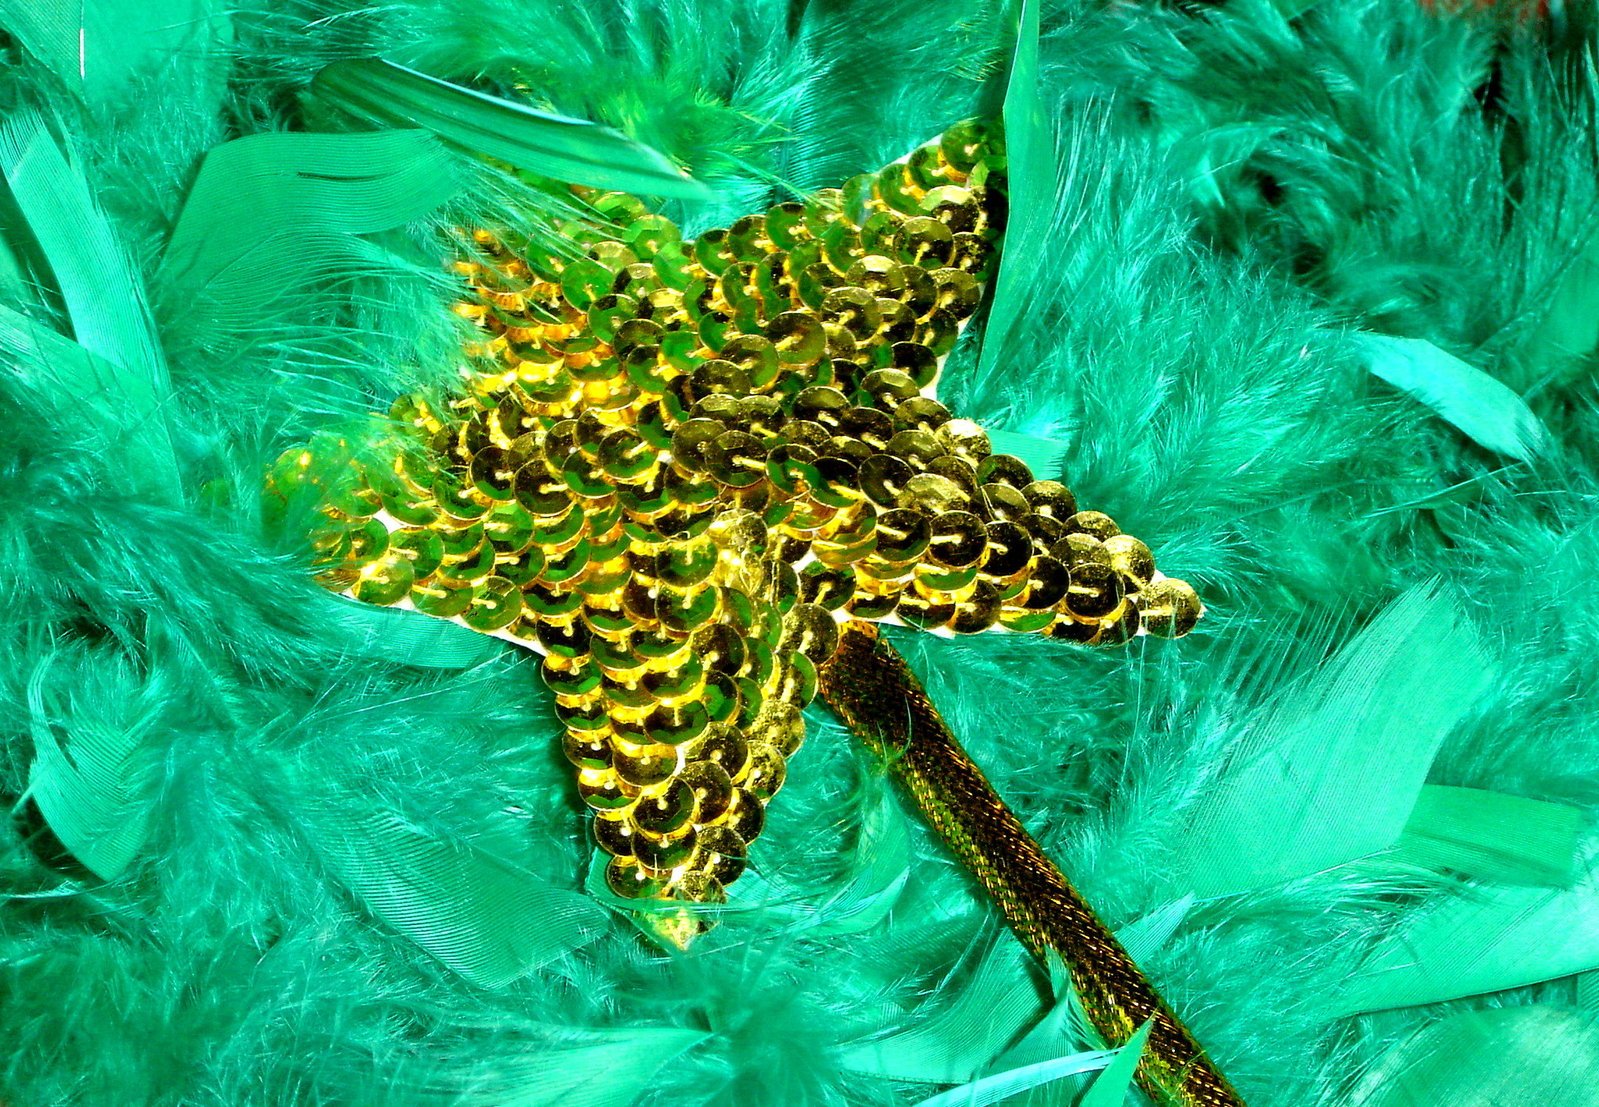 a green starfish in the center of some feathers